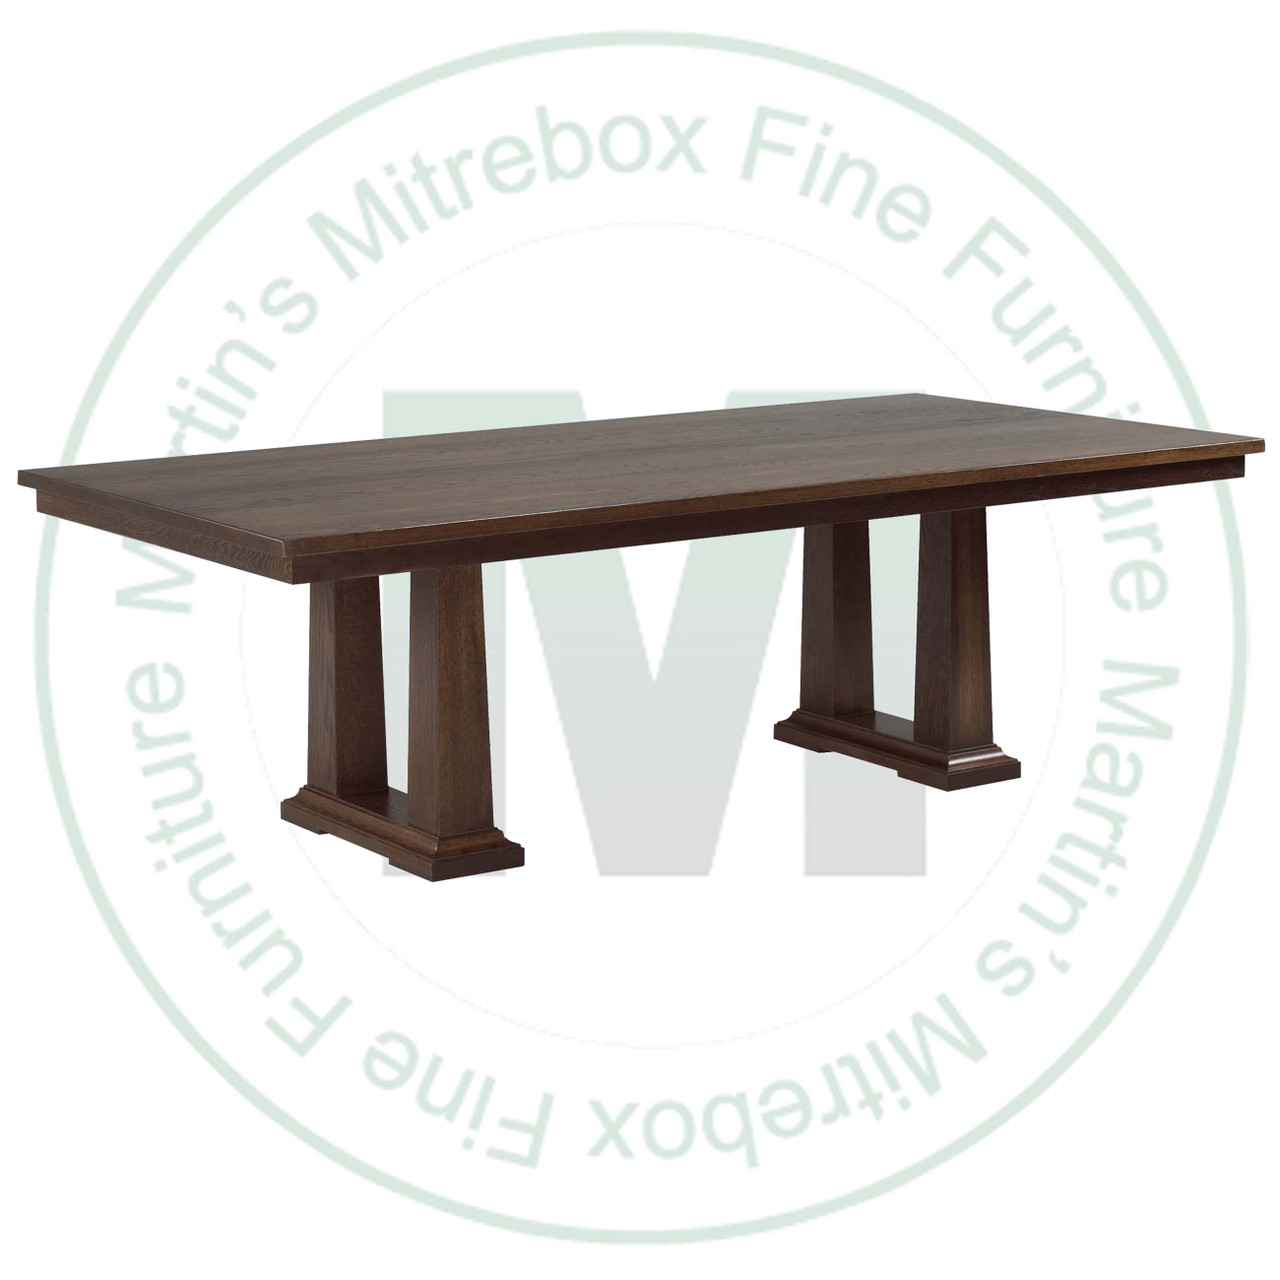 Oak Acropolis Extension Double Pedestal Table 42''D x 96''W x 30''H With 2 - 12'' Leaves Table Has 1.25'' Thick Top